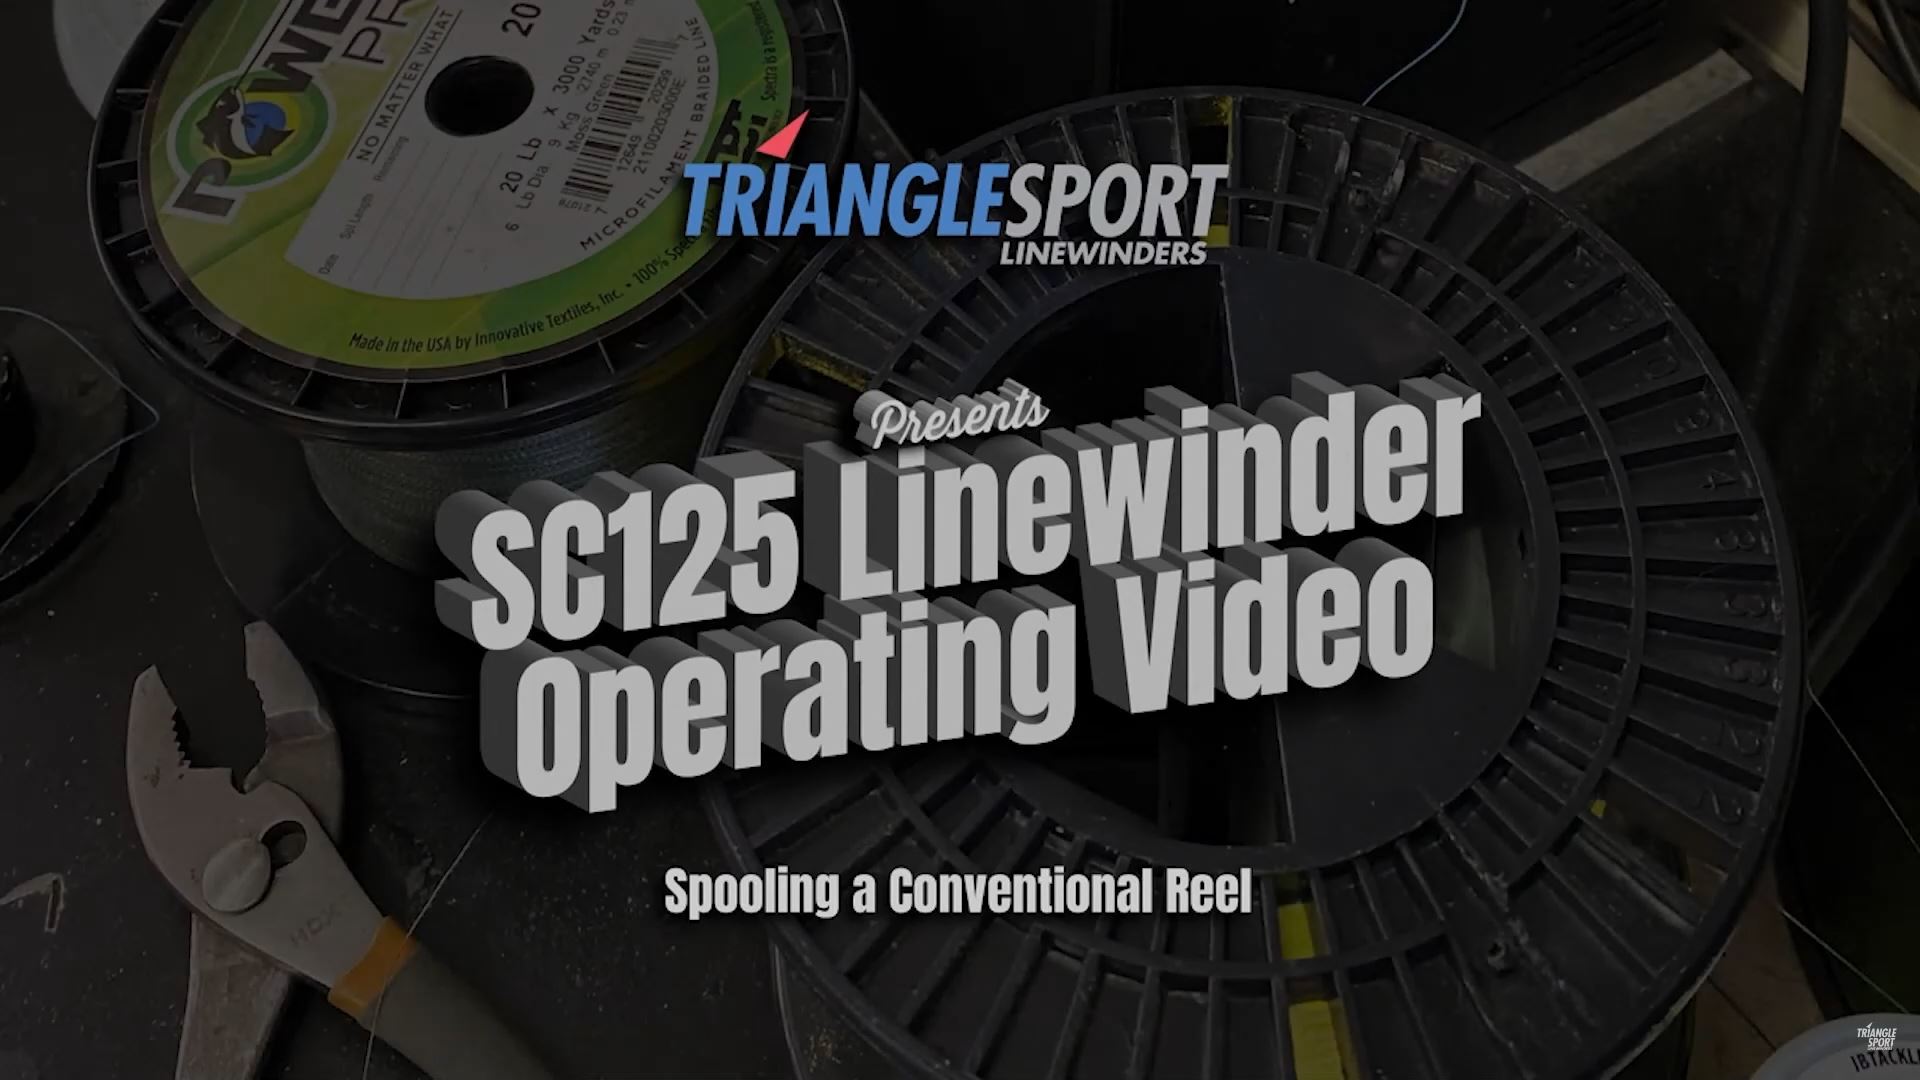 Setup & Spooling a Conventional Reel